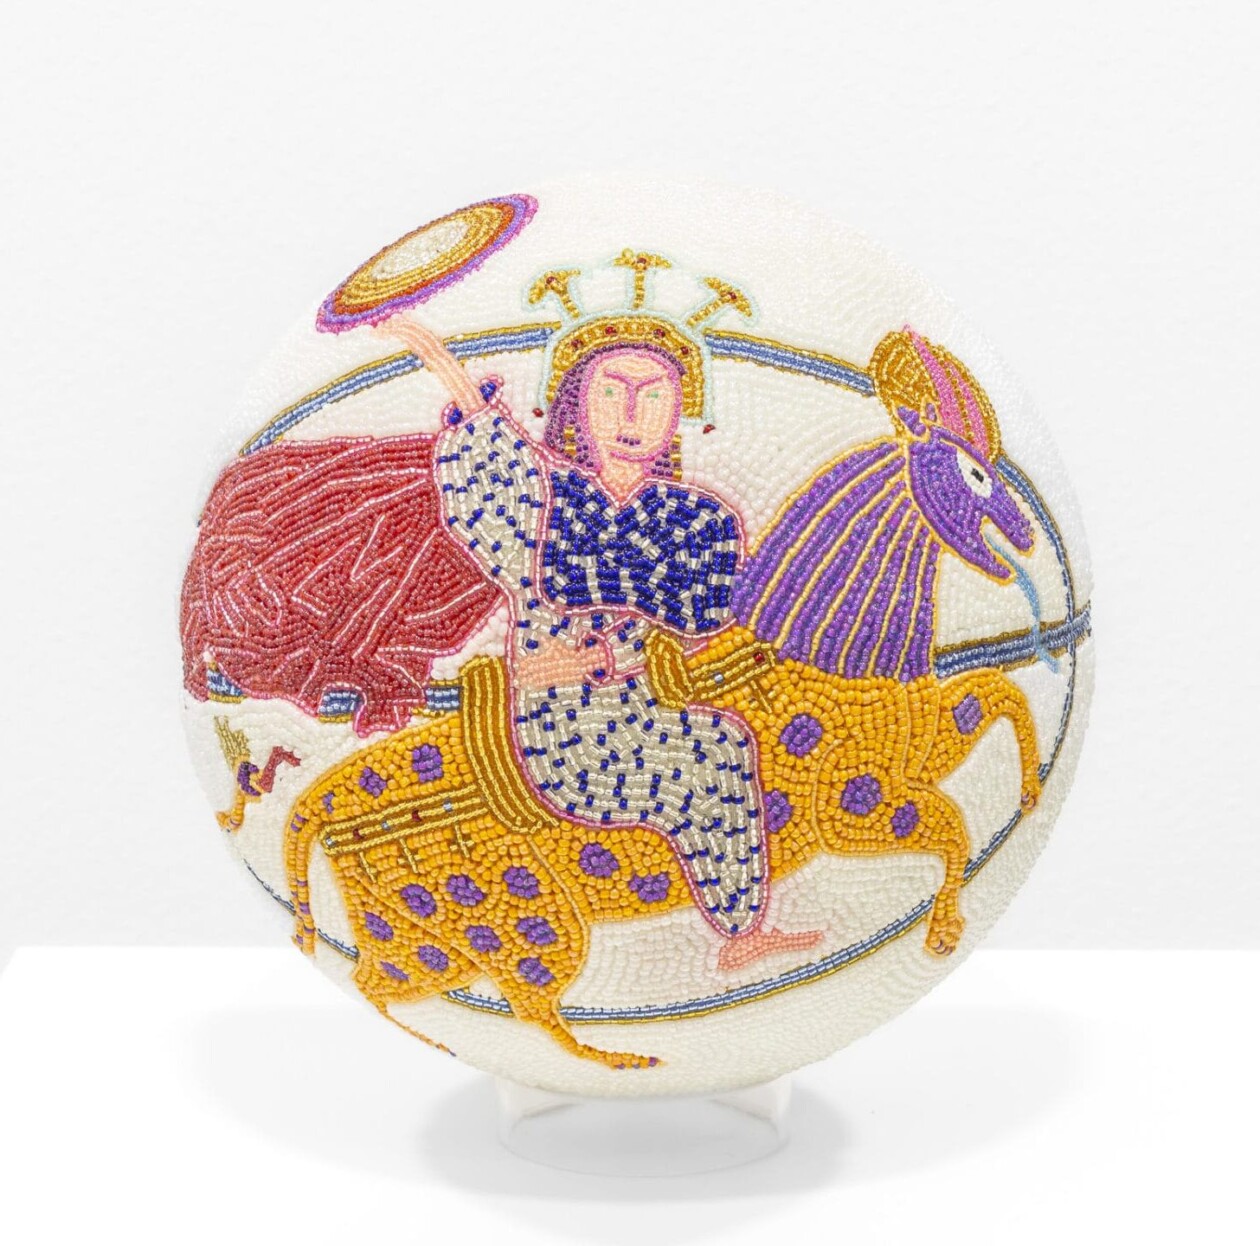 From Playground To Prophecy, Jorge Mañes Rubio's Beaded Basketball Sculptures (12)